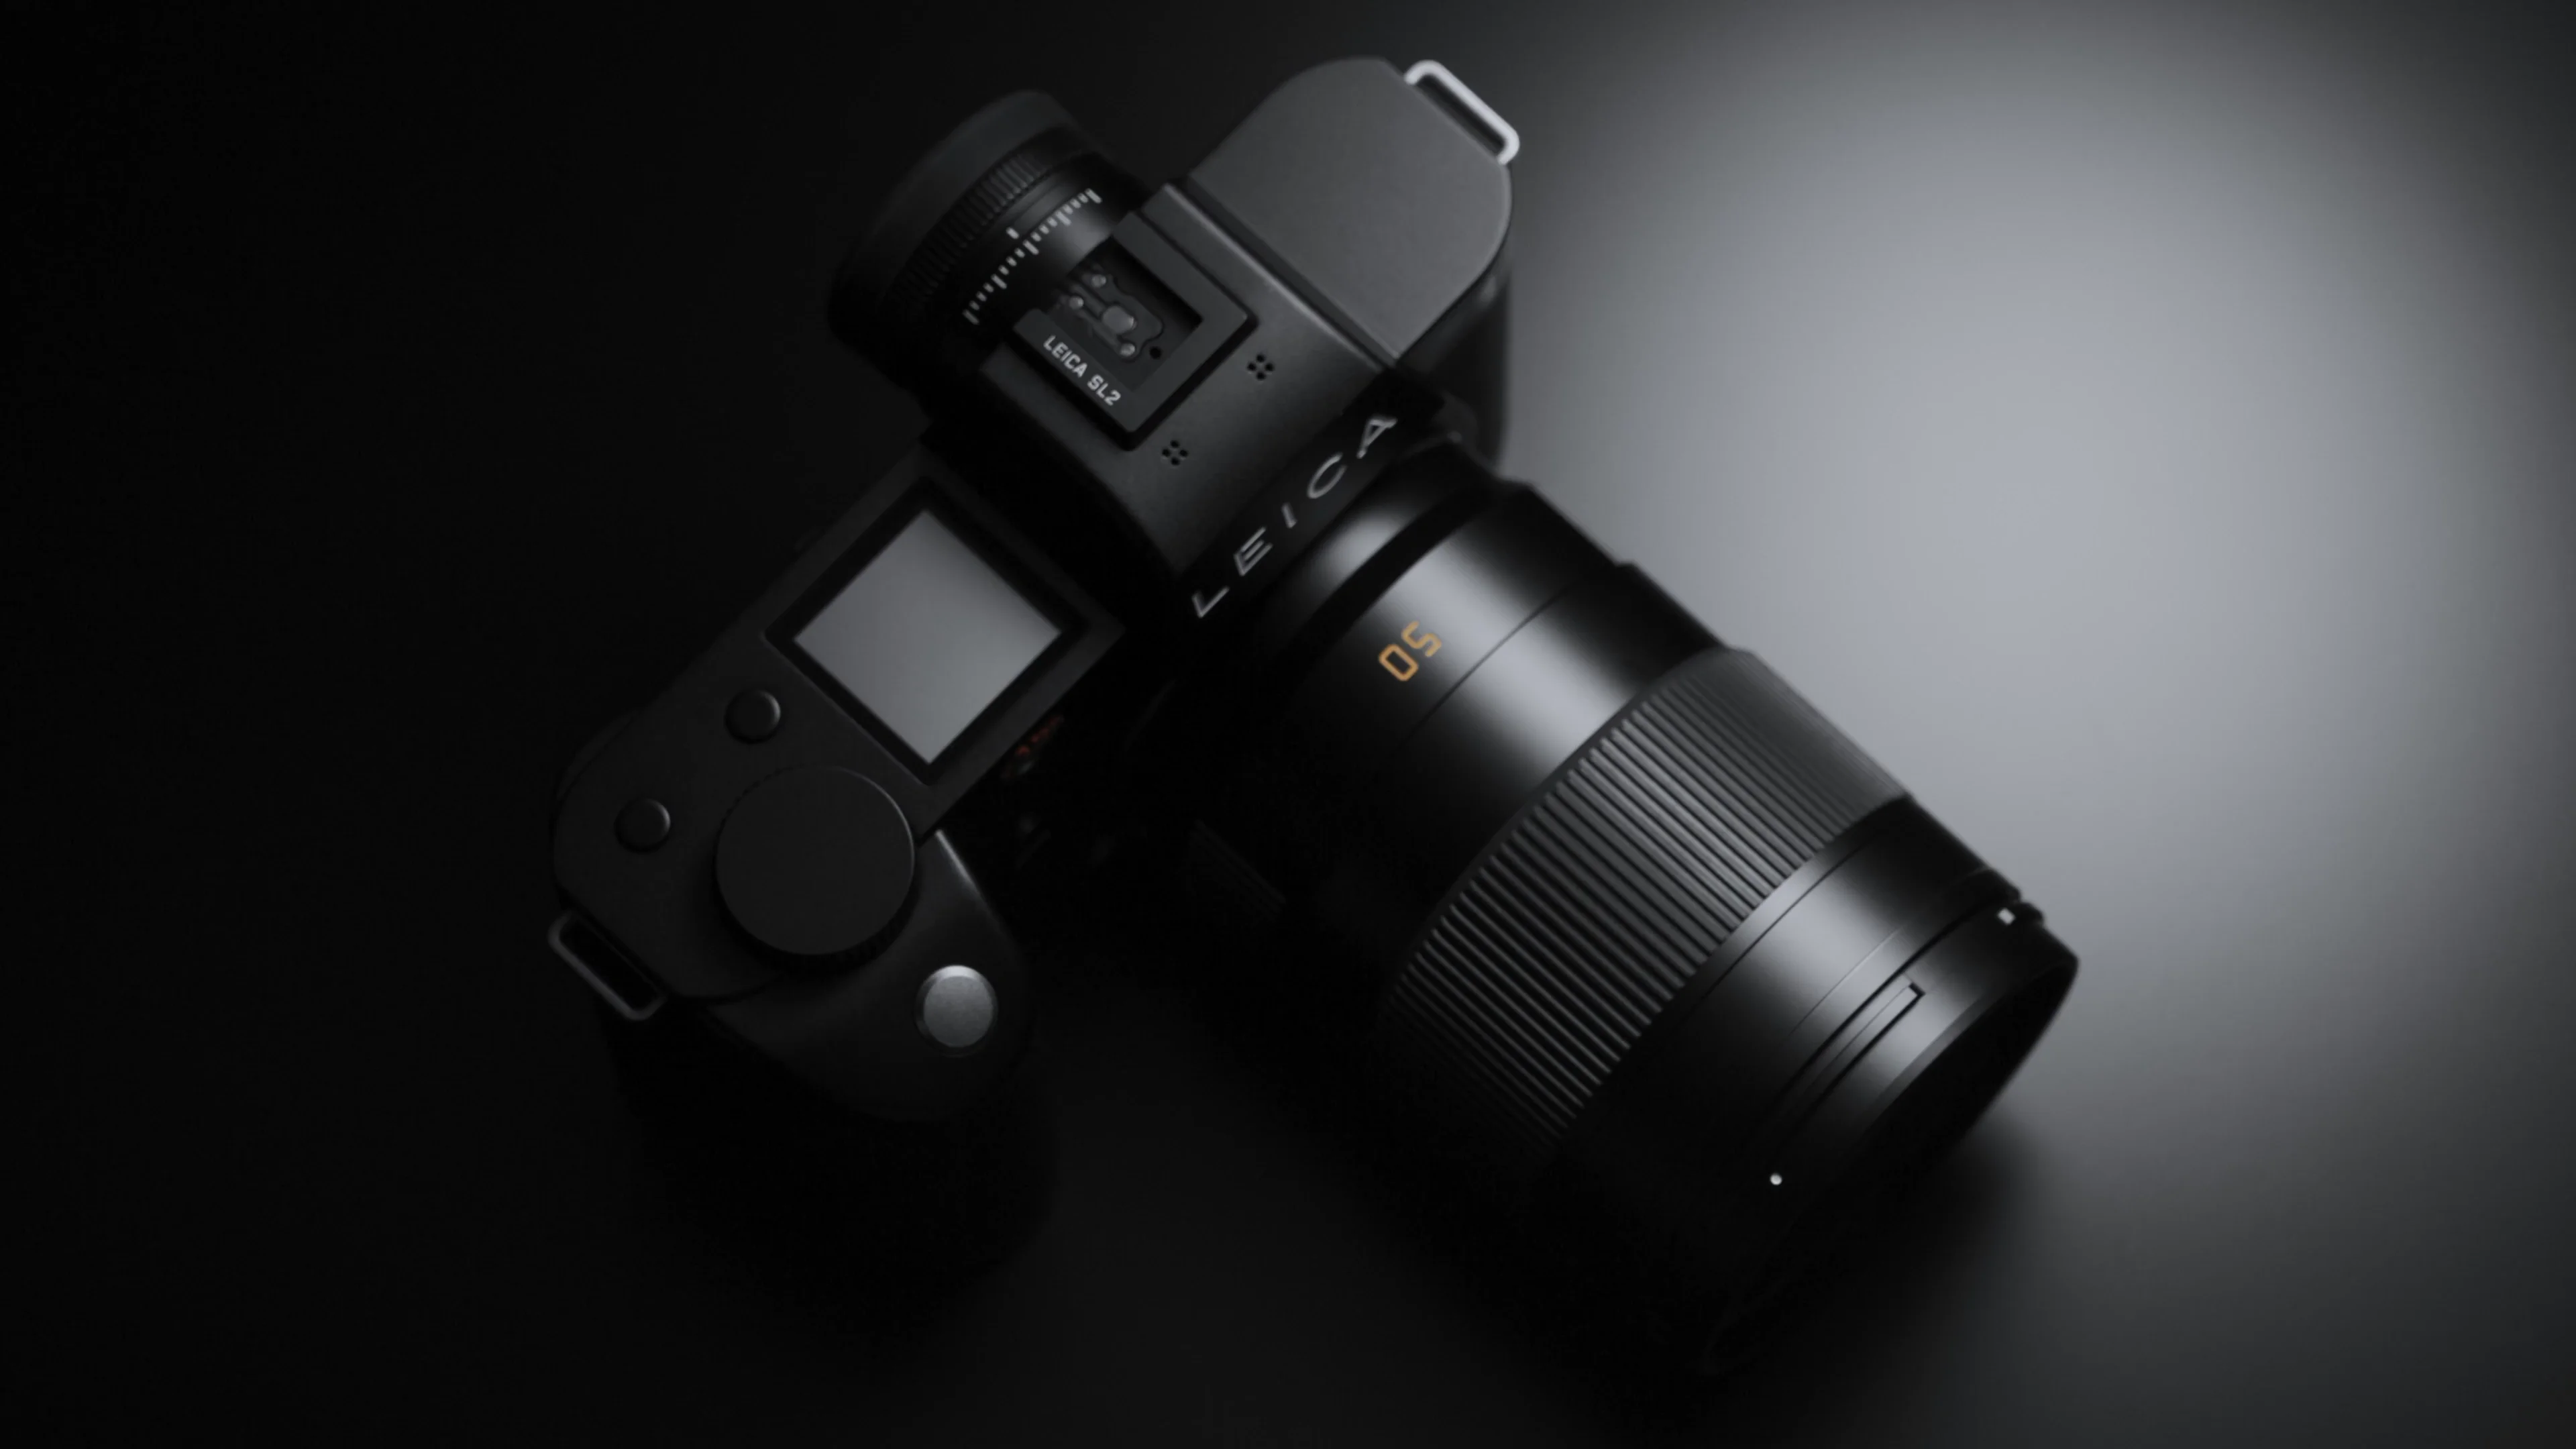 The new LEICA V-LUX 2 on Vimeo